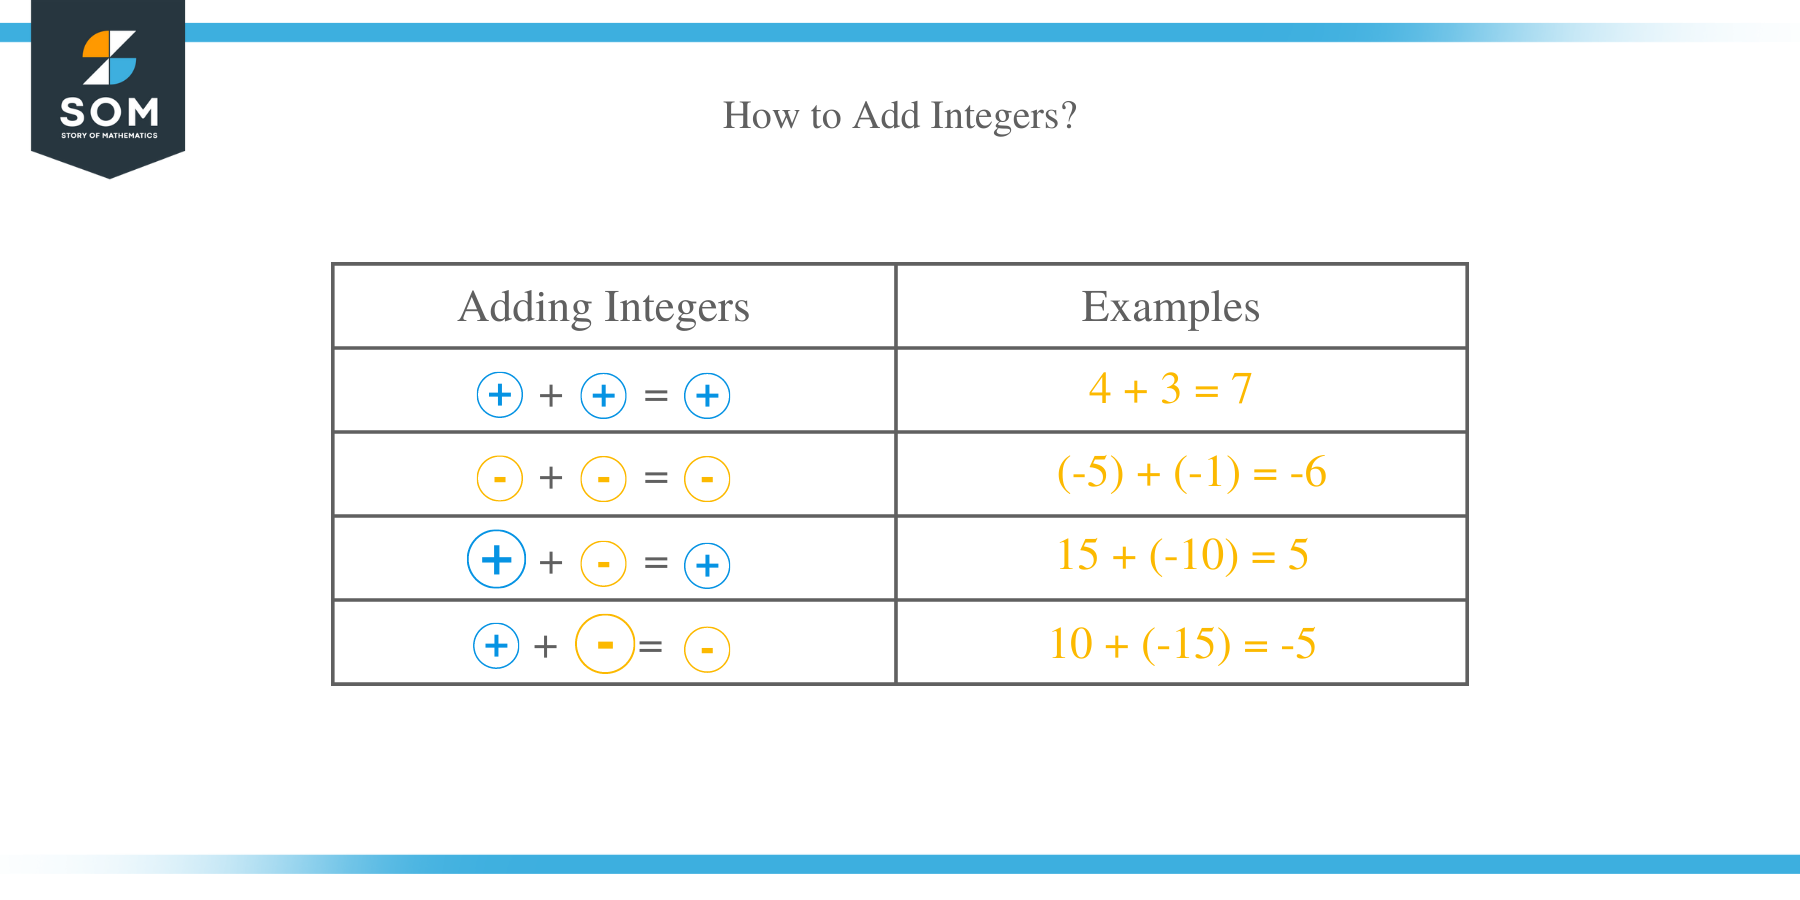 How to Add Integers?